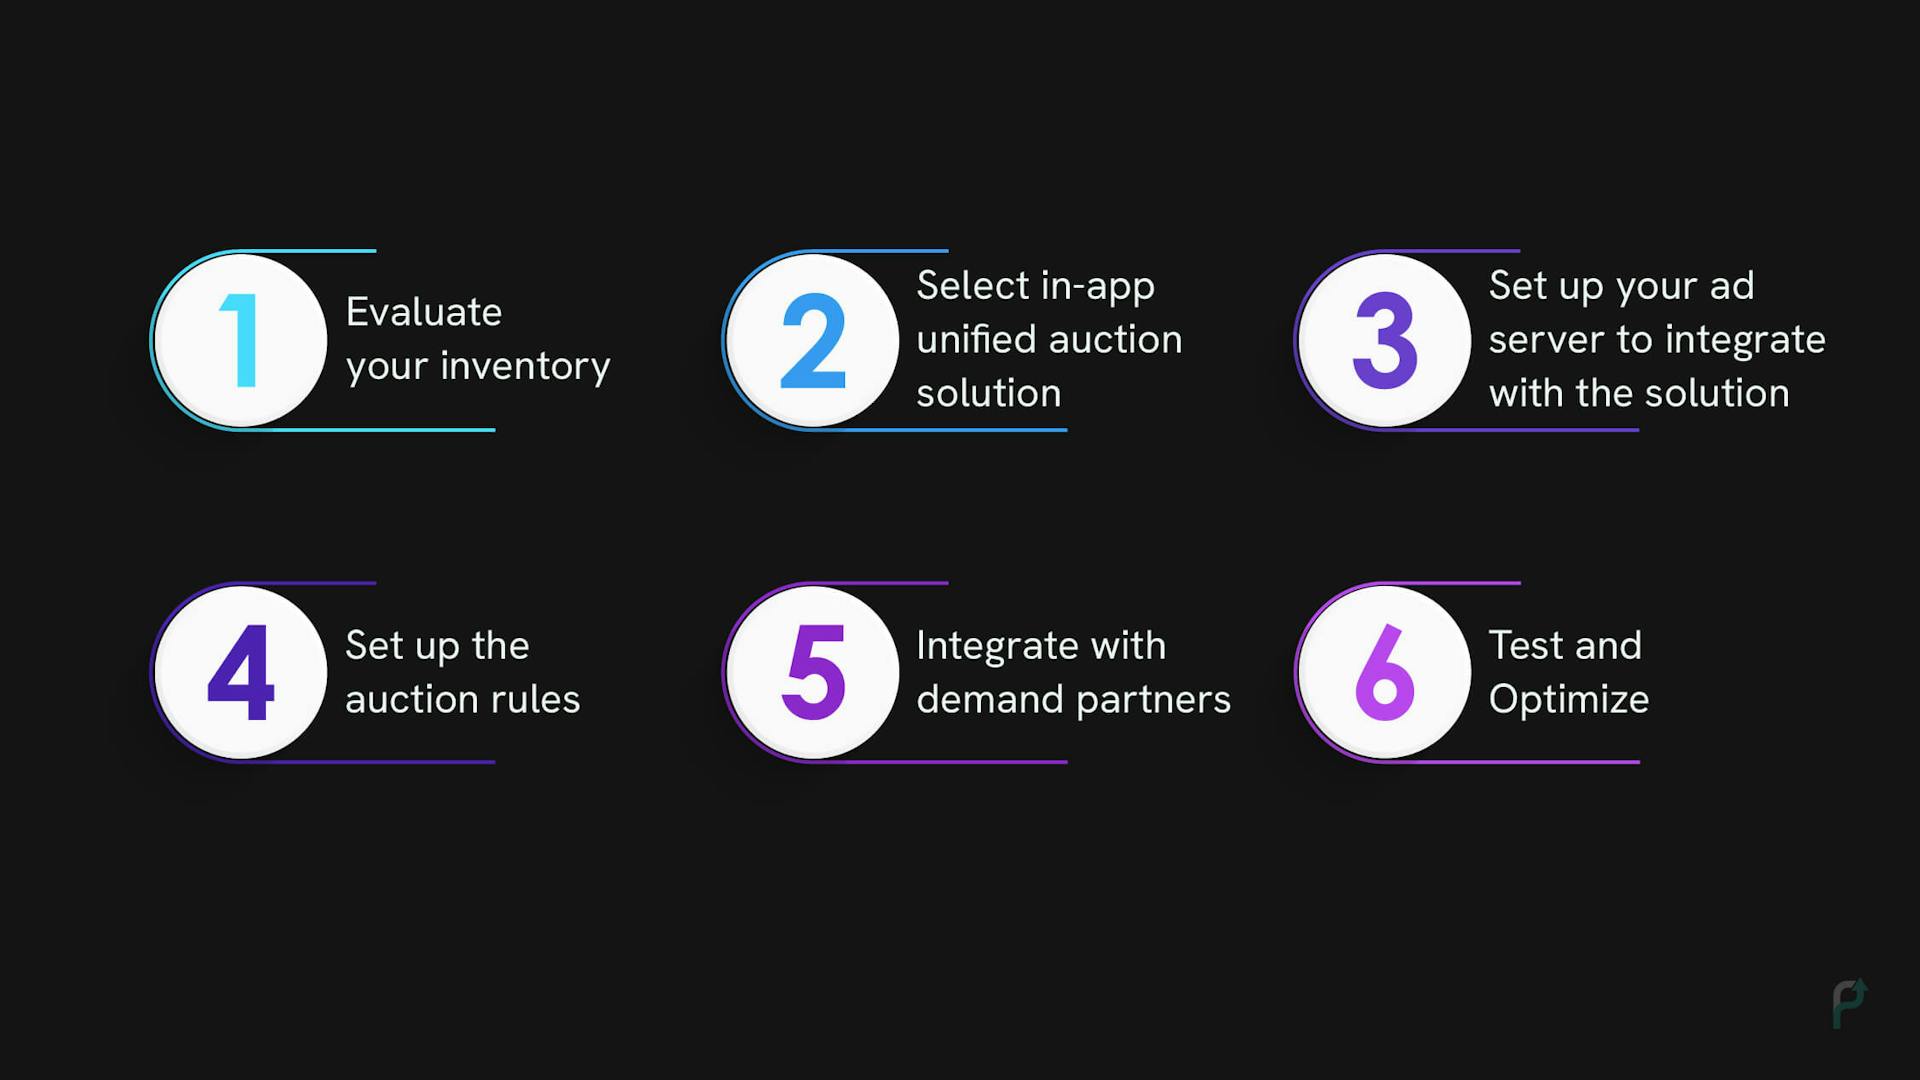 How to implement in-app unified auction